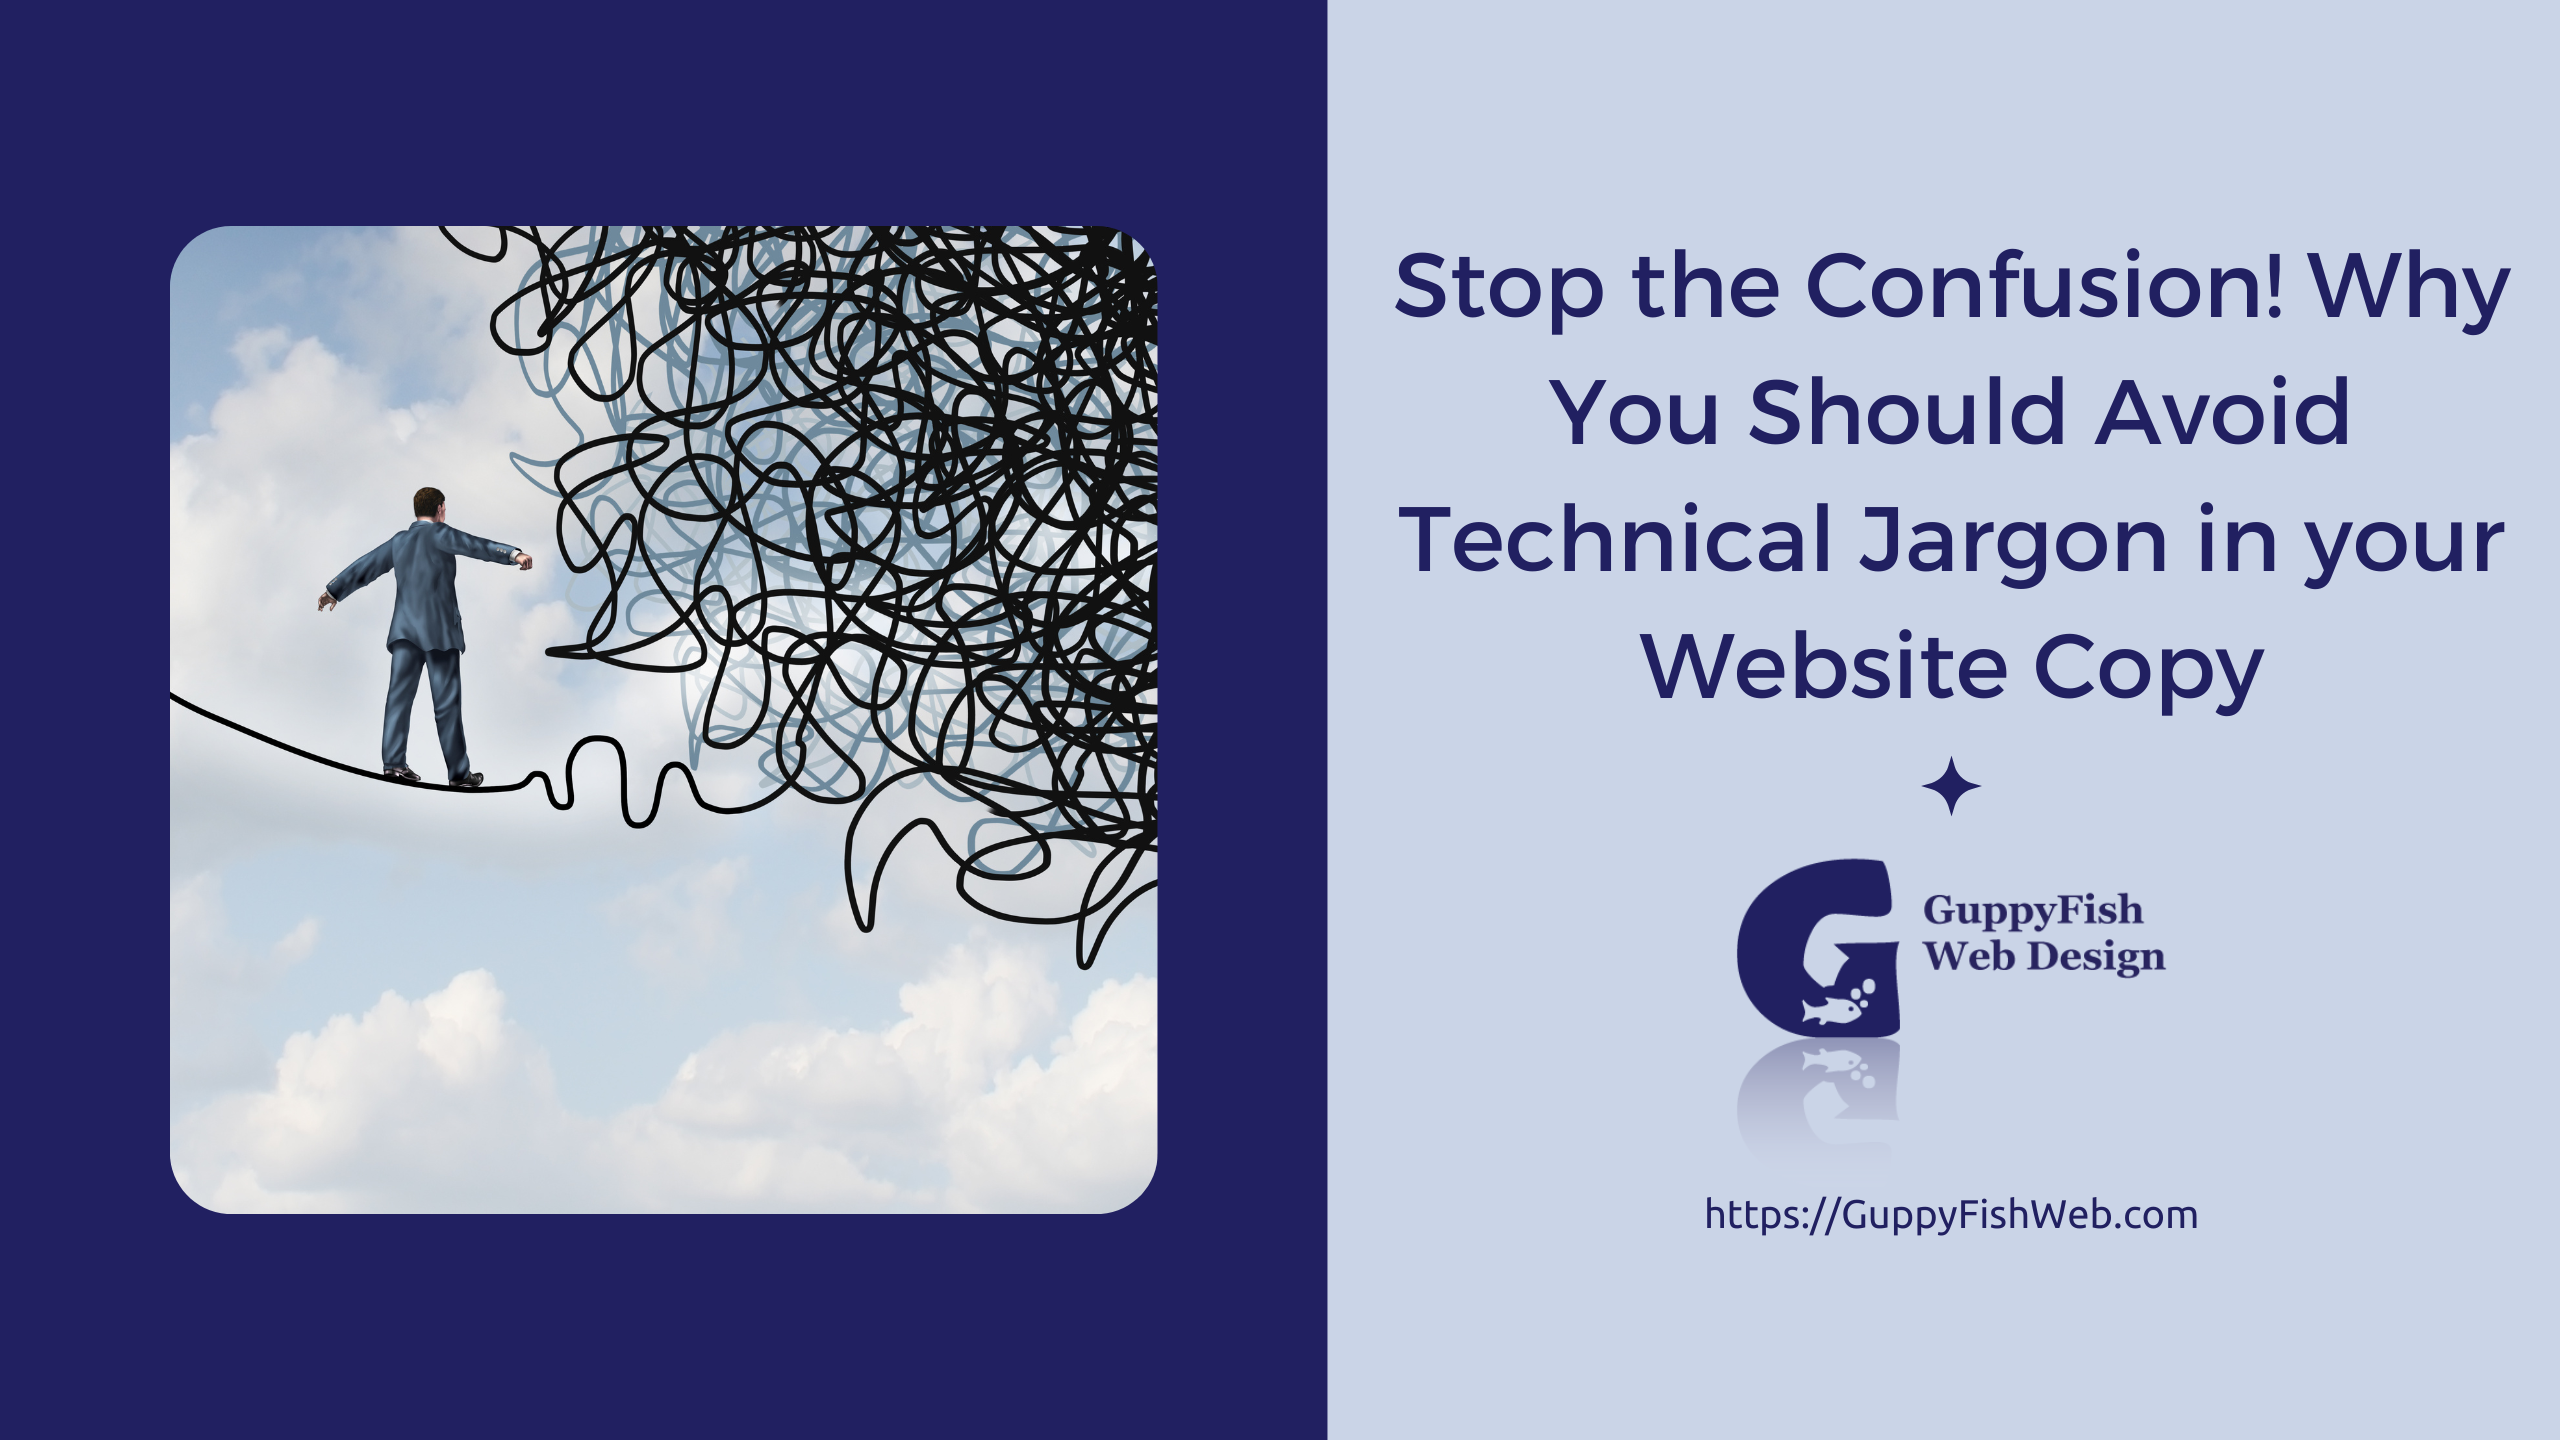 Stop the Confusion! Why You Should Avoid Technical Jargon in your Website Copy